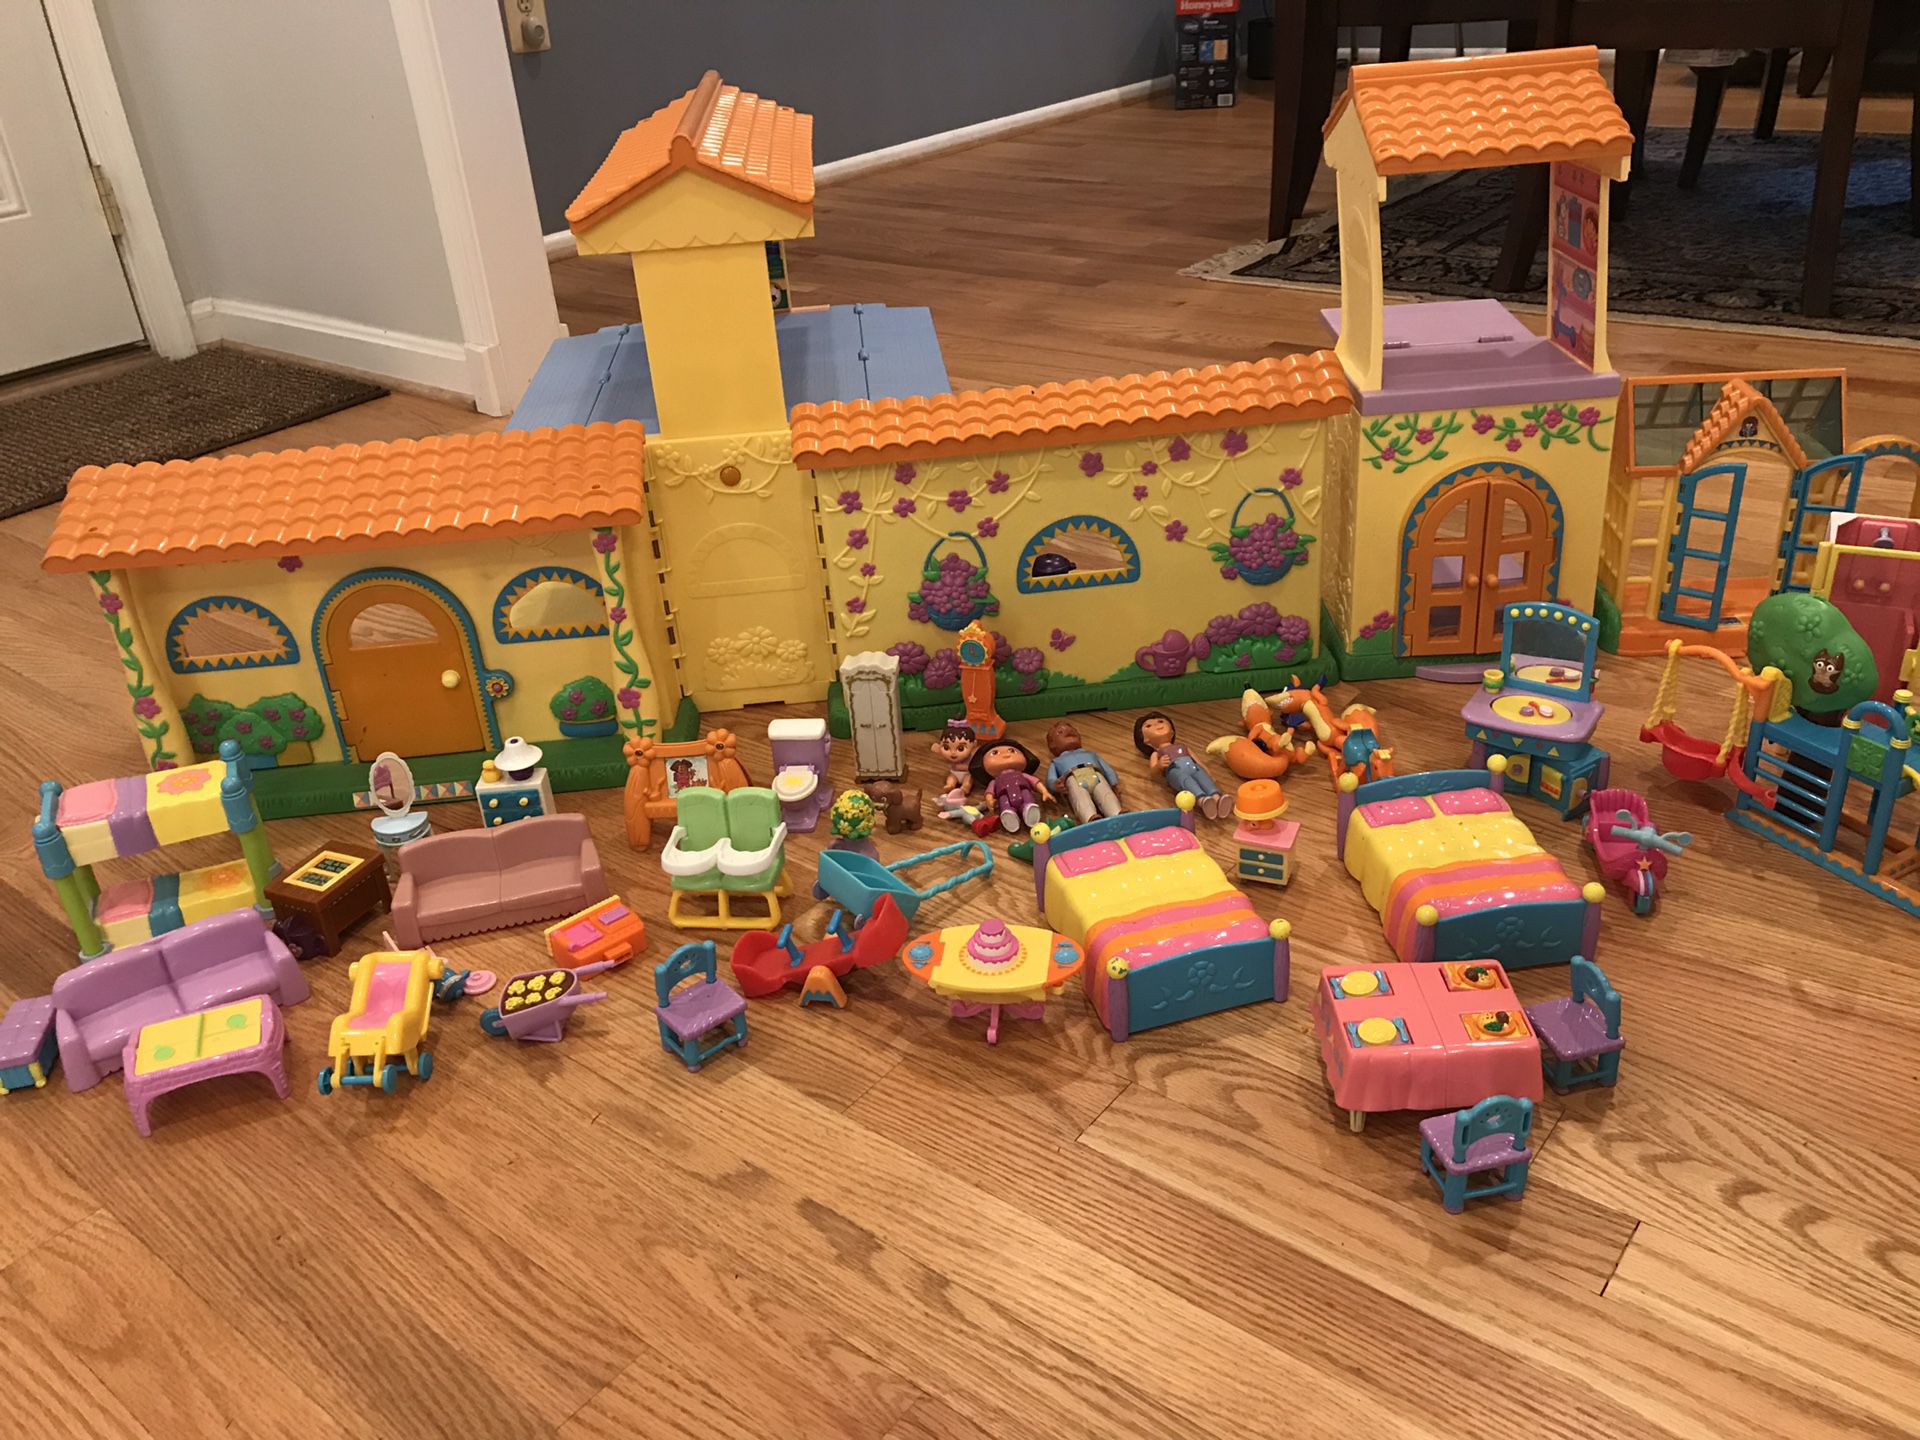 Dora’s pop up talking house with lots of figurines and furniture